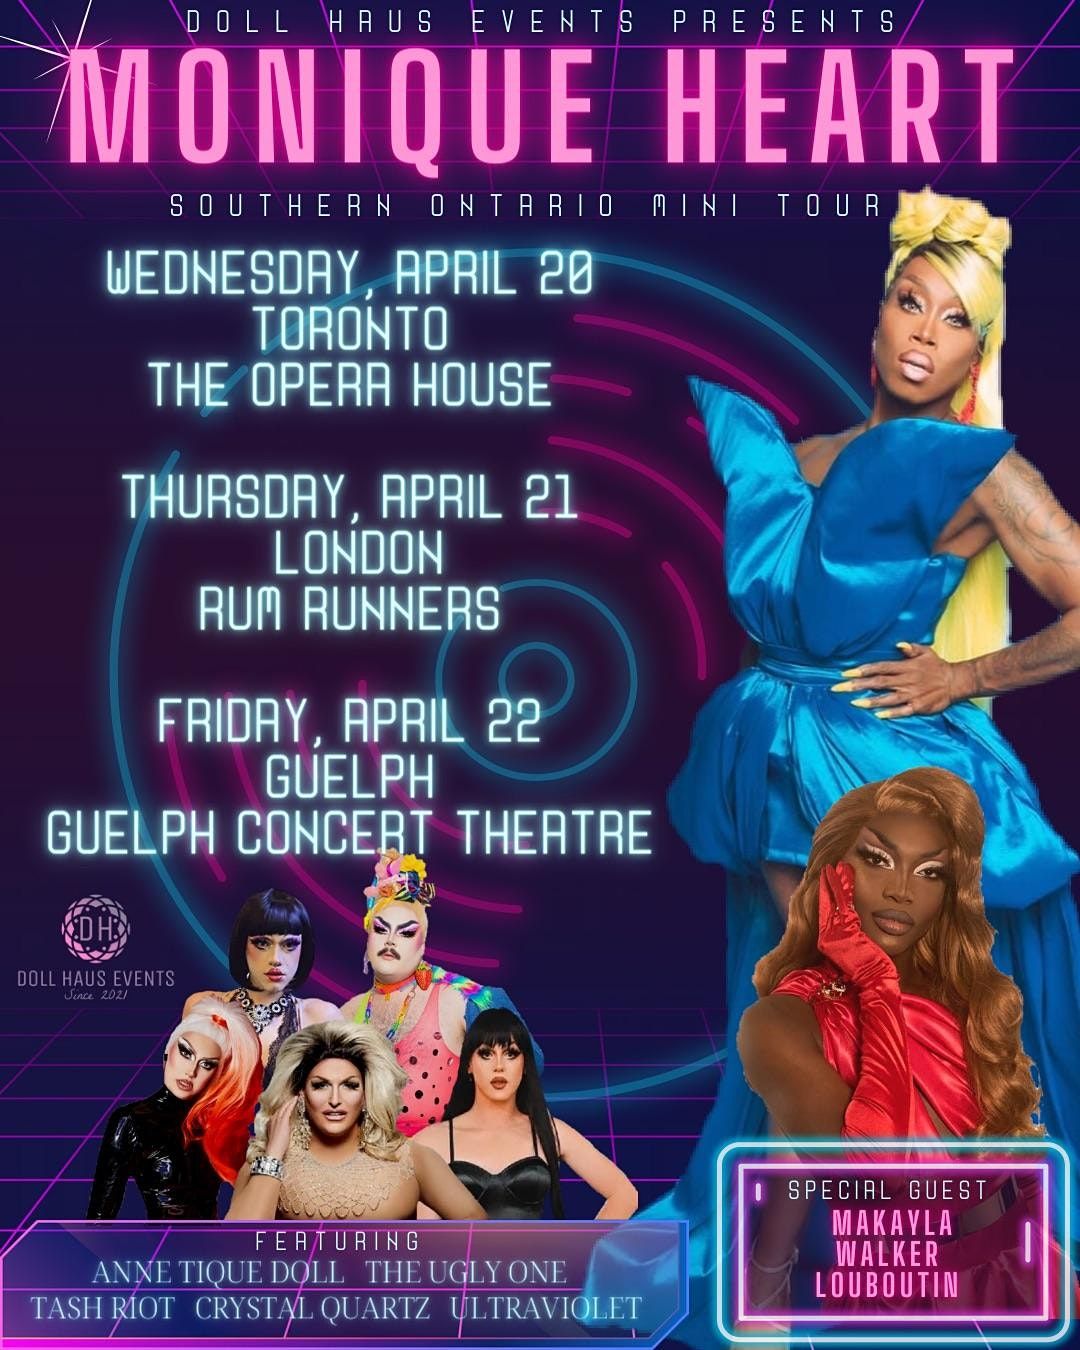 Monique Heart Live in Toronto at the Opera House!